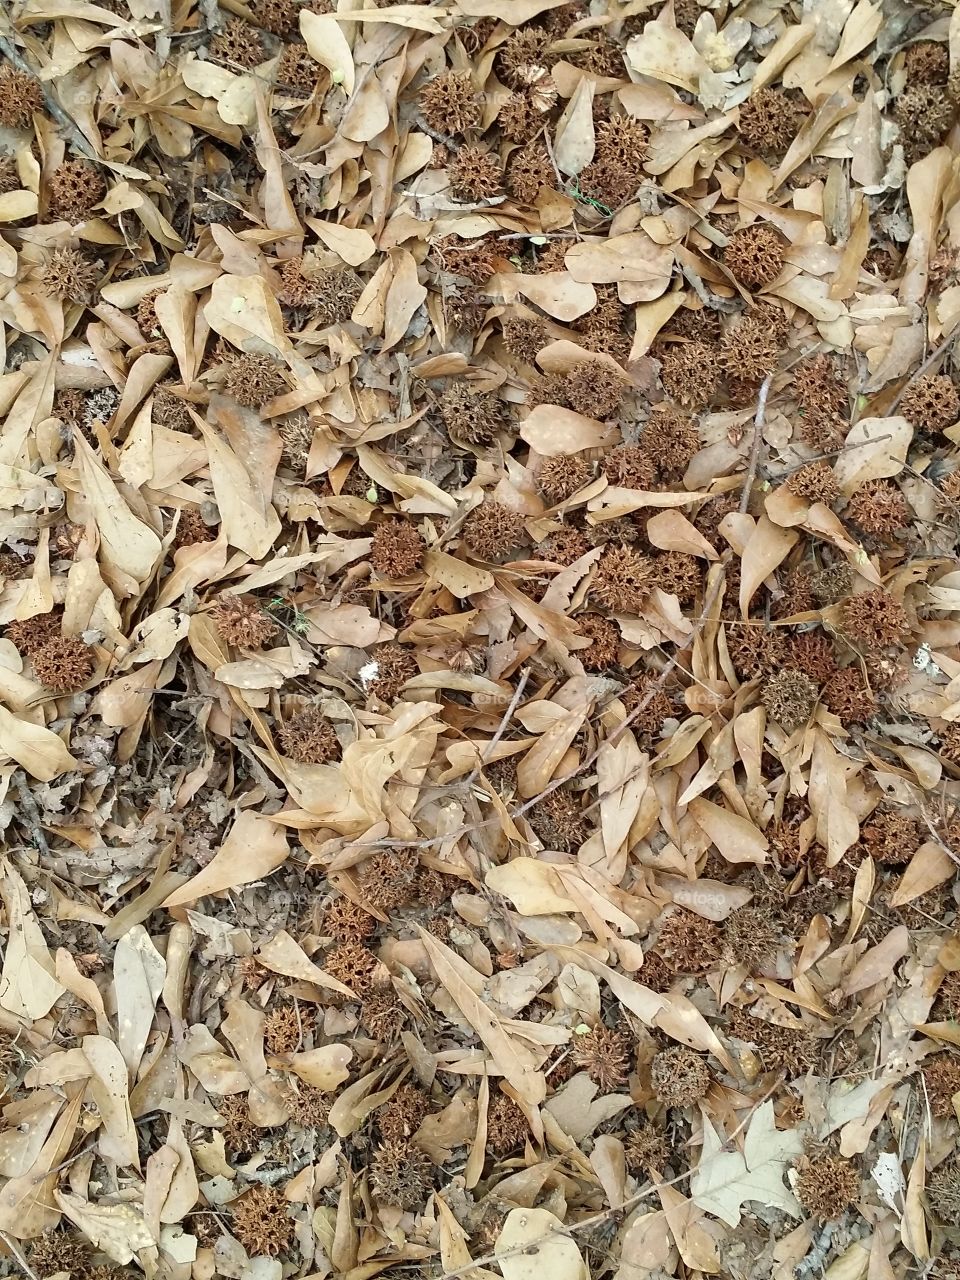 Sweet Gum Balls On A Bed of Dry Leaves 